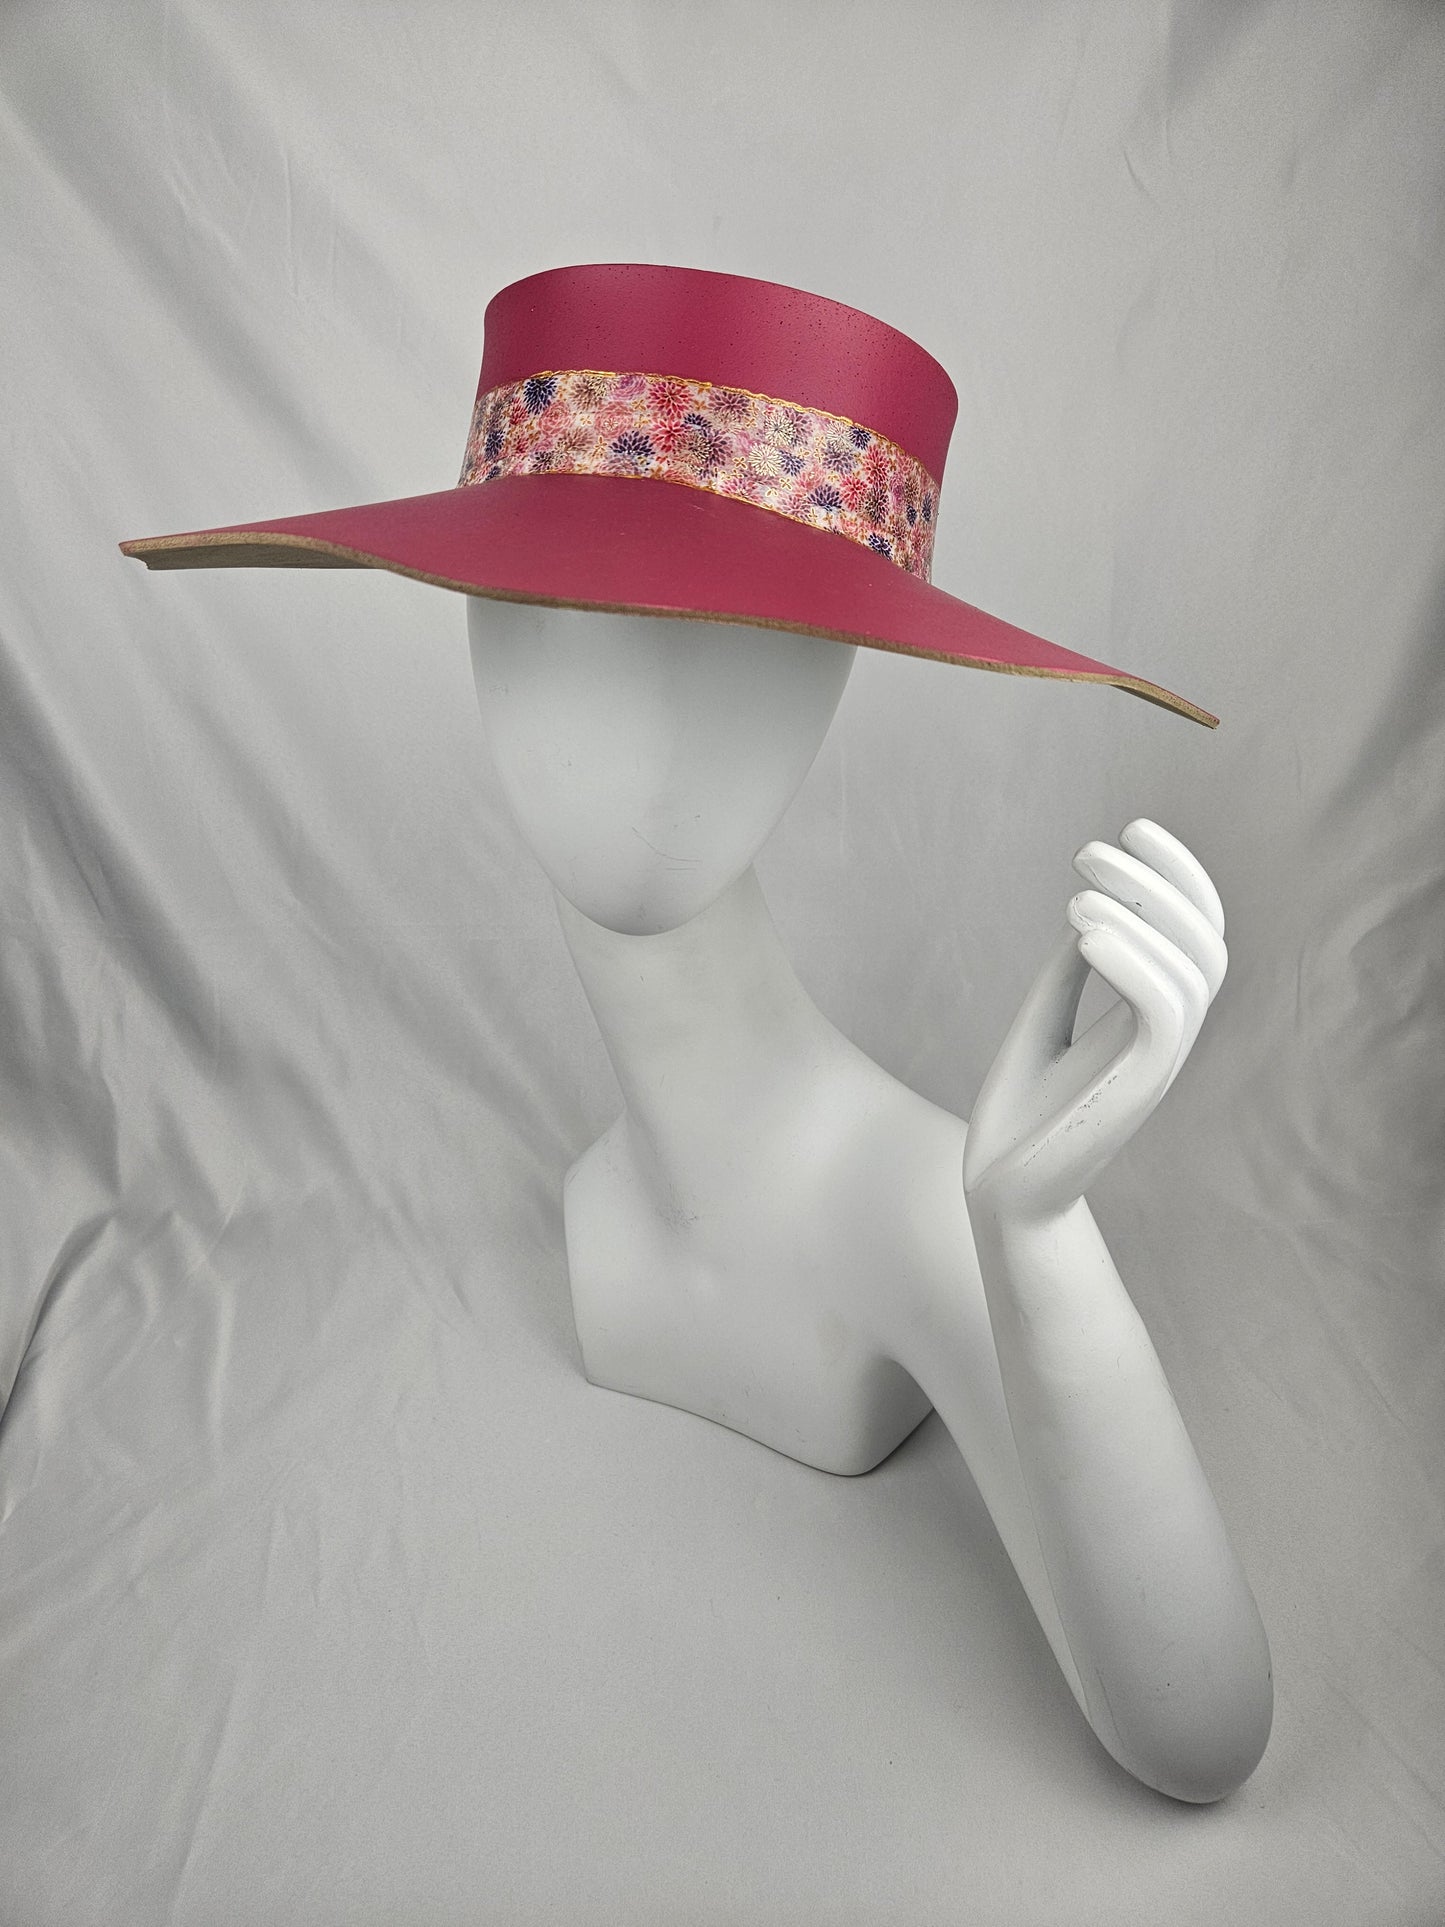 Spring/Summer Pink Lotus Foam Sun Visor Hat with Floral Band and Handpainted Floral Motif: Church, 1950s, Derby, Easter, Swim, Pool, UV Resistant, No Headache